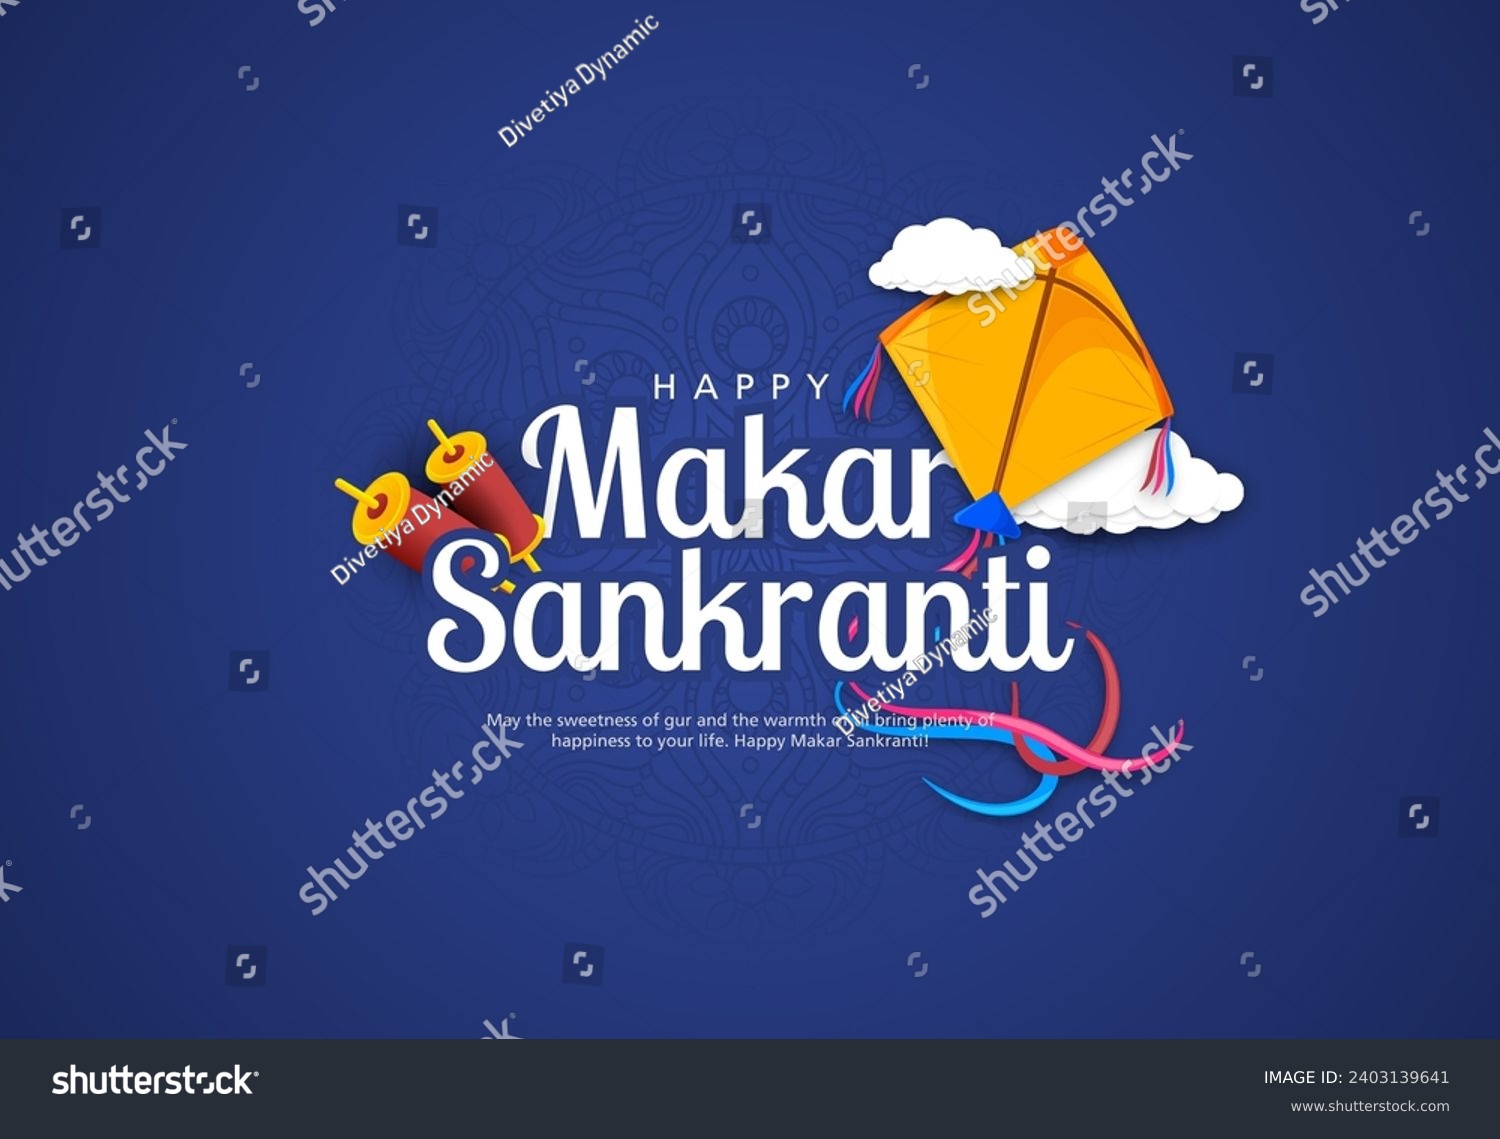 SVG of Happy Makar Sankranti With Realistic Flying Colorful Kites And String Spools On Blue Background For Makar Sankranti Festival. svg